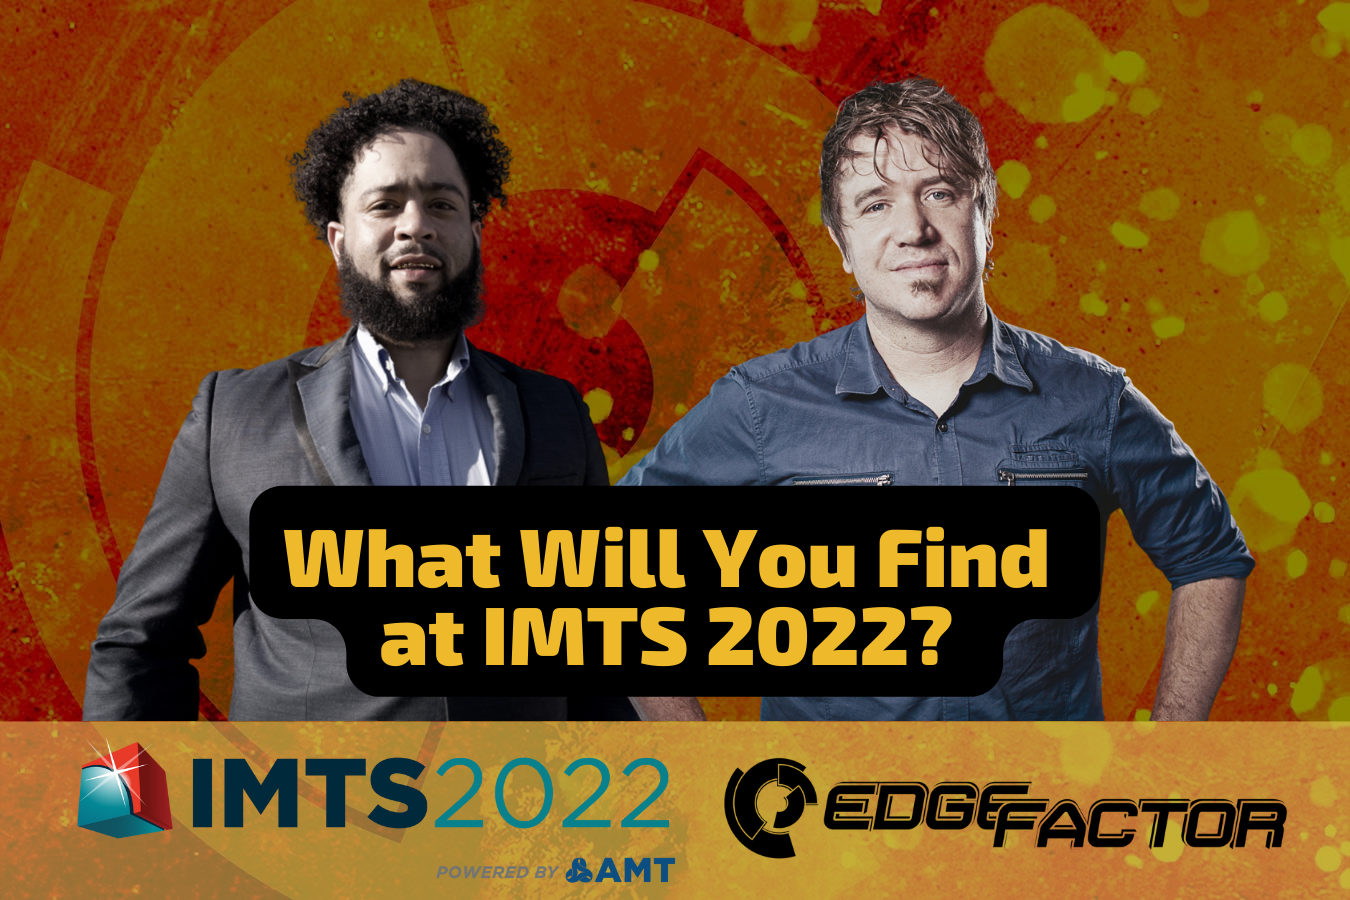 Jeremy Bout and Drew Crowe from Edge Factor will be at IMTS 2022 